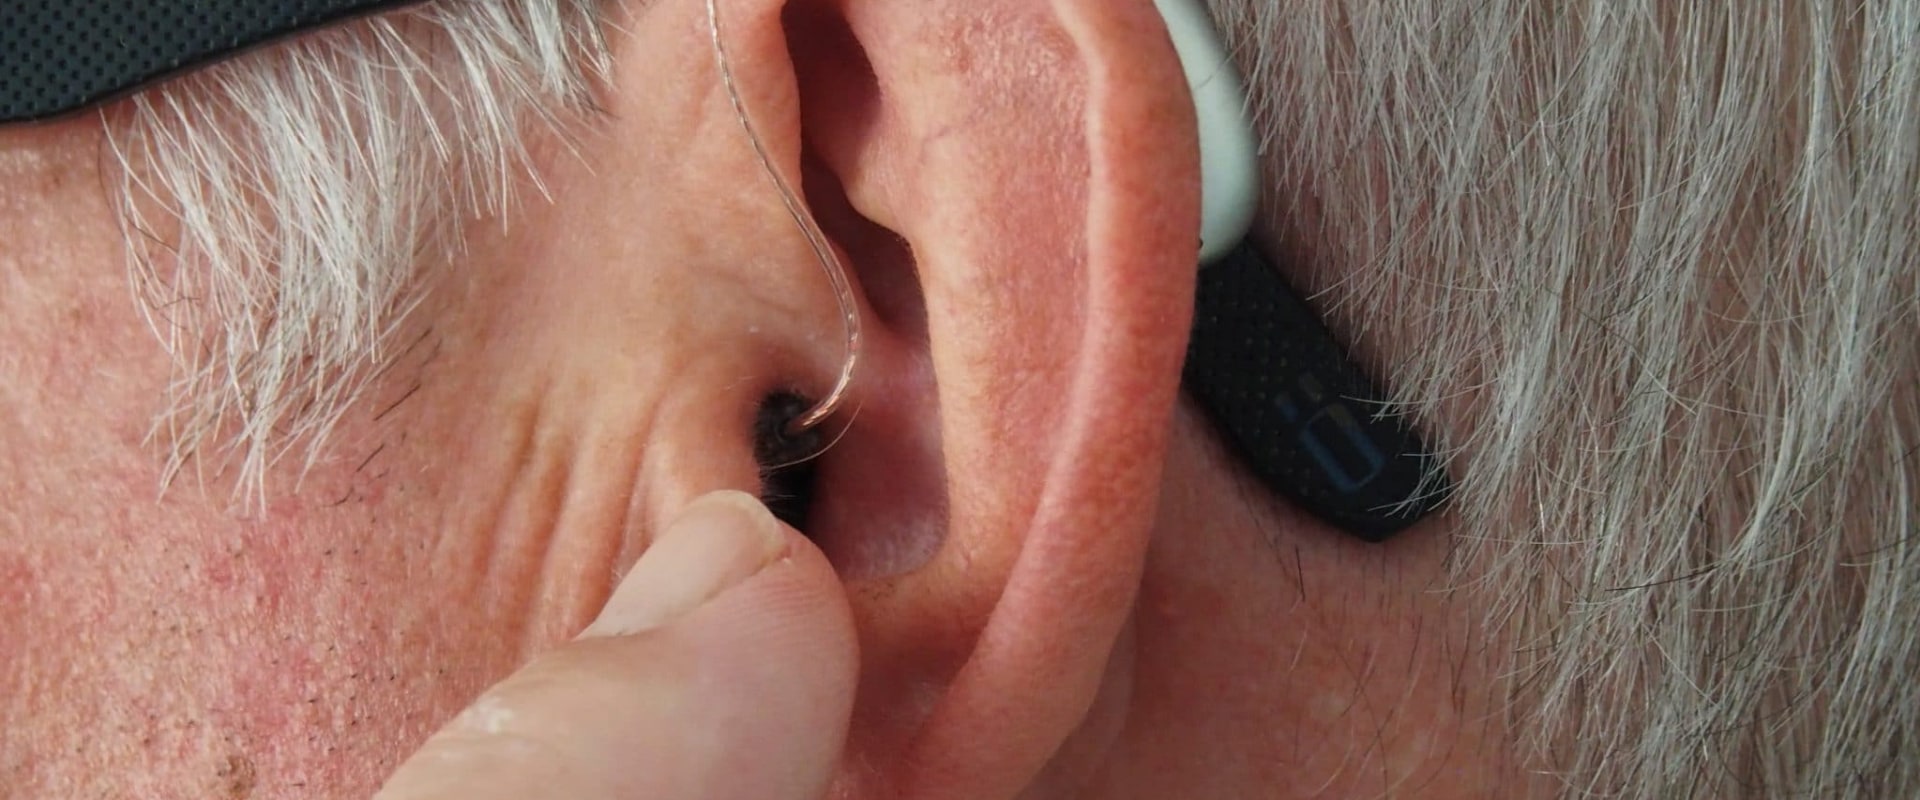 How long should you wear hearing aids in a day?